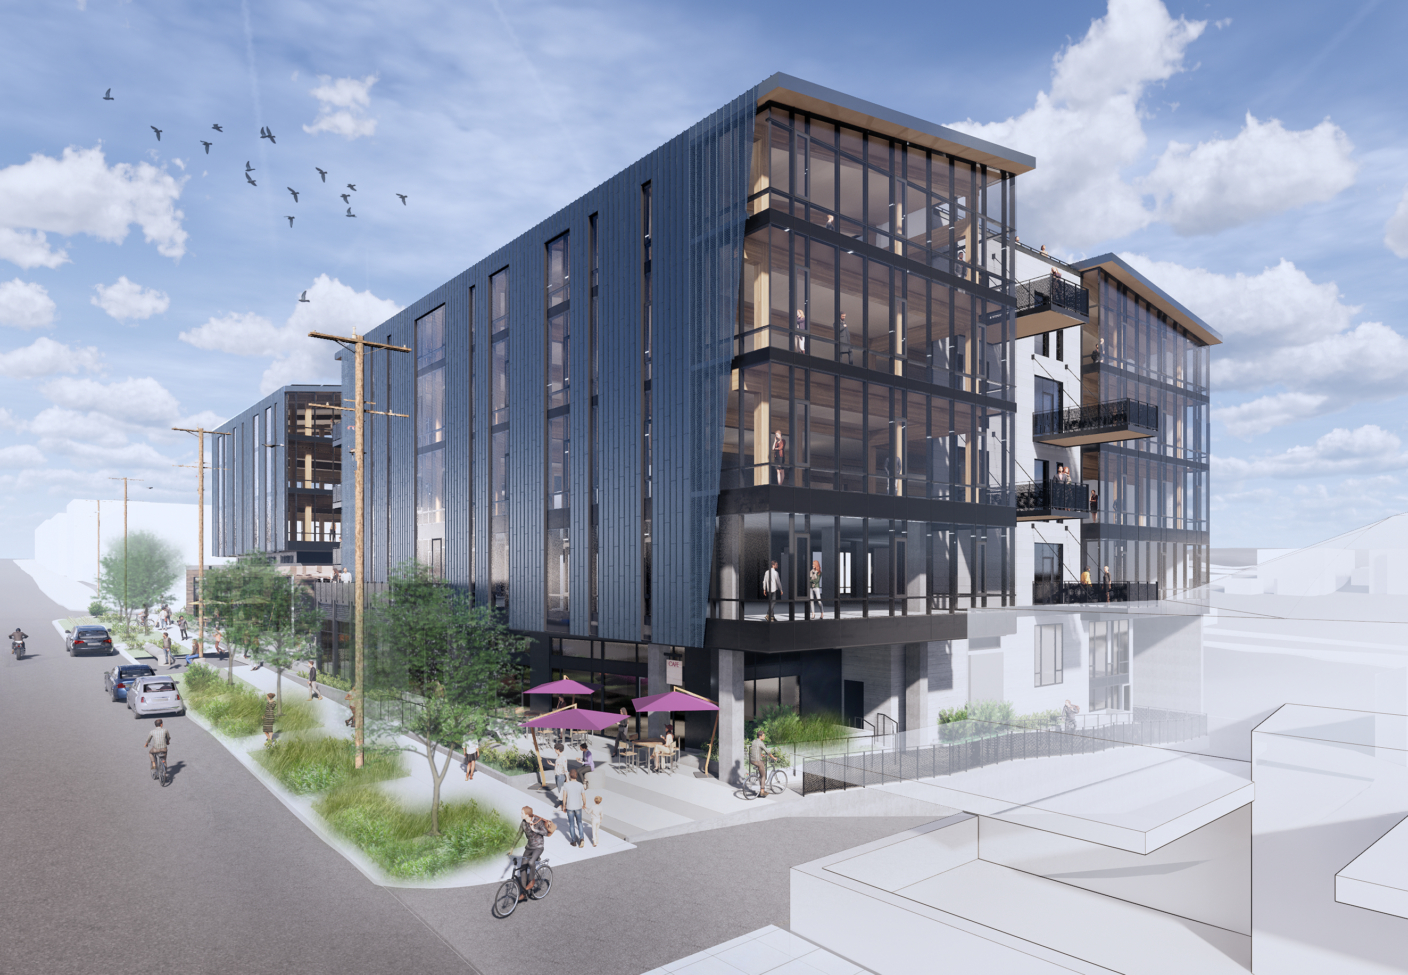 Join the Mass Timber Committee for a construction tour of 35 Stone. The design team will guide a tour through the active construction site to discuss the design process, outcomes and highlight key considerations for building with mass timber. Afterwards we will head to Pacific Inn Pub to continue the mass timber discussion.